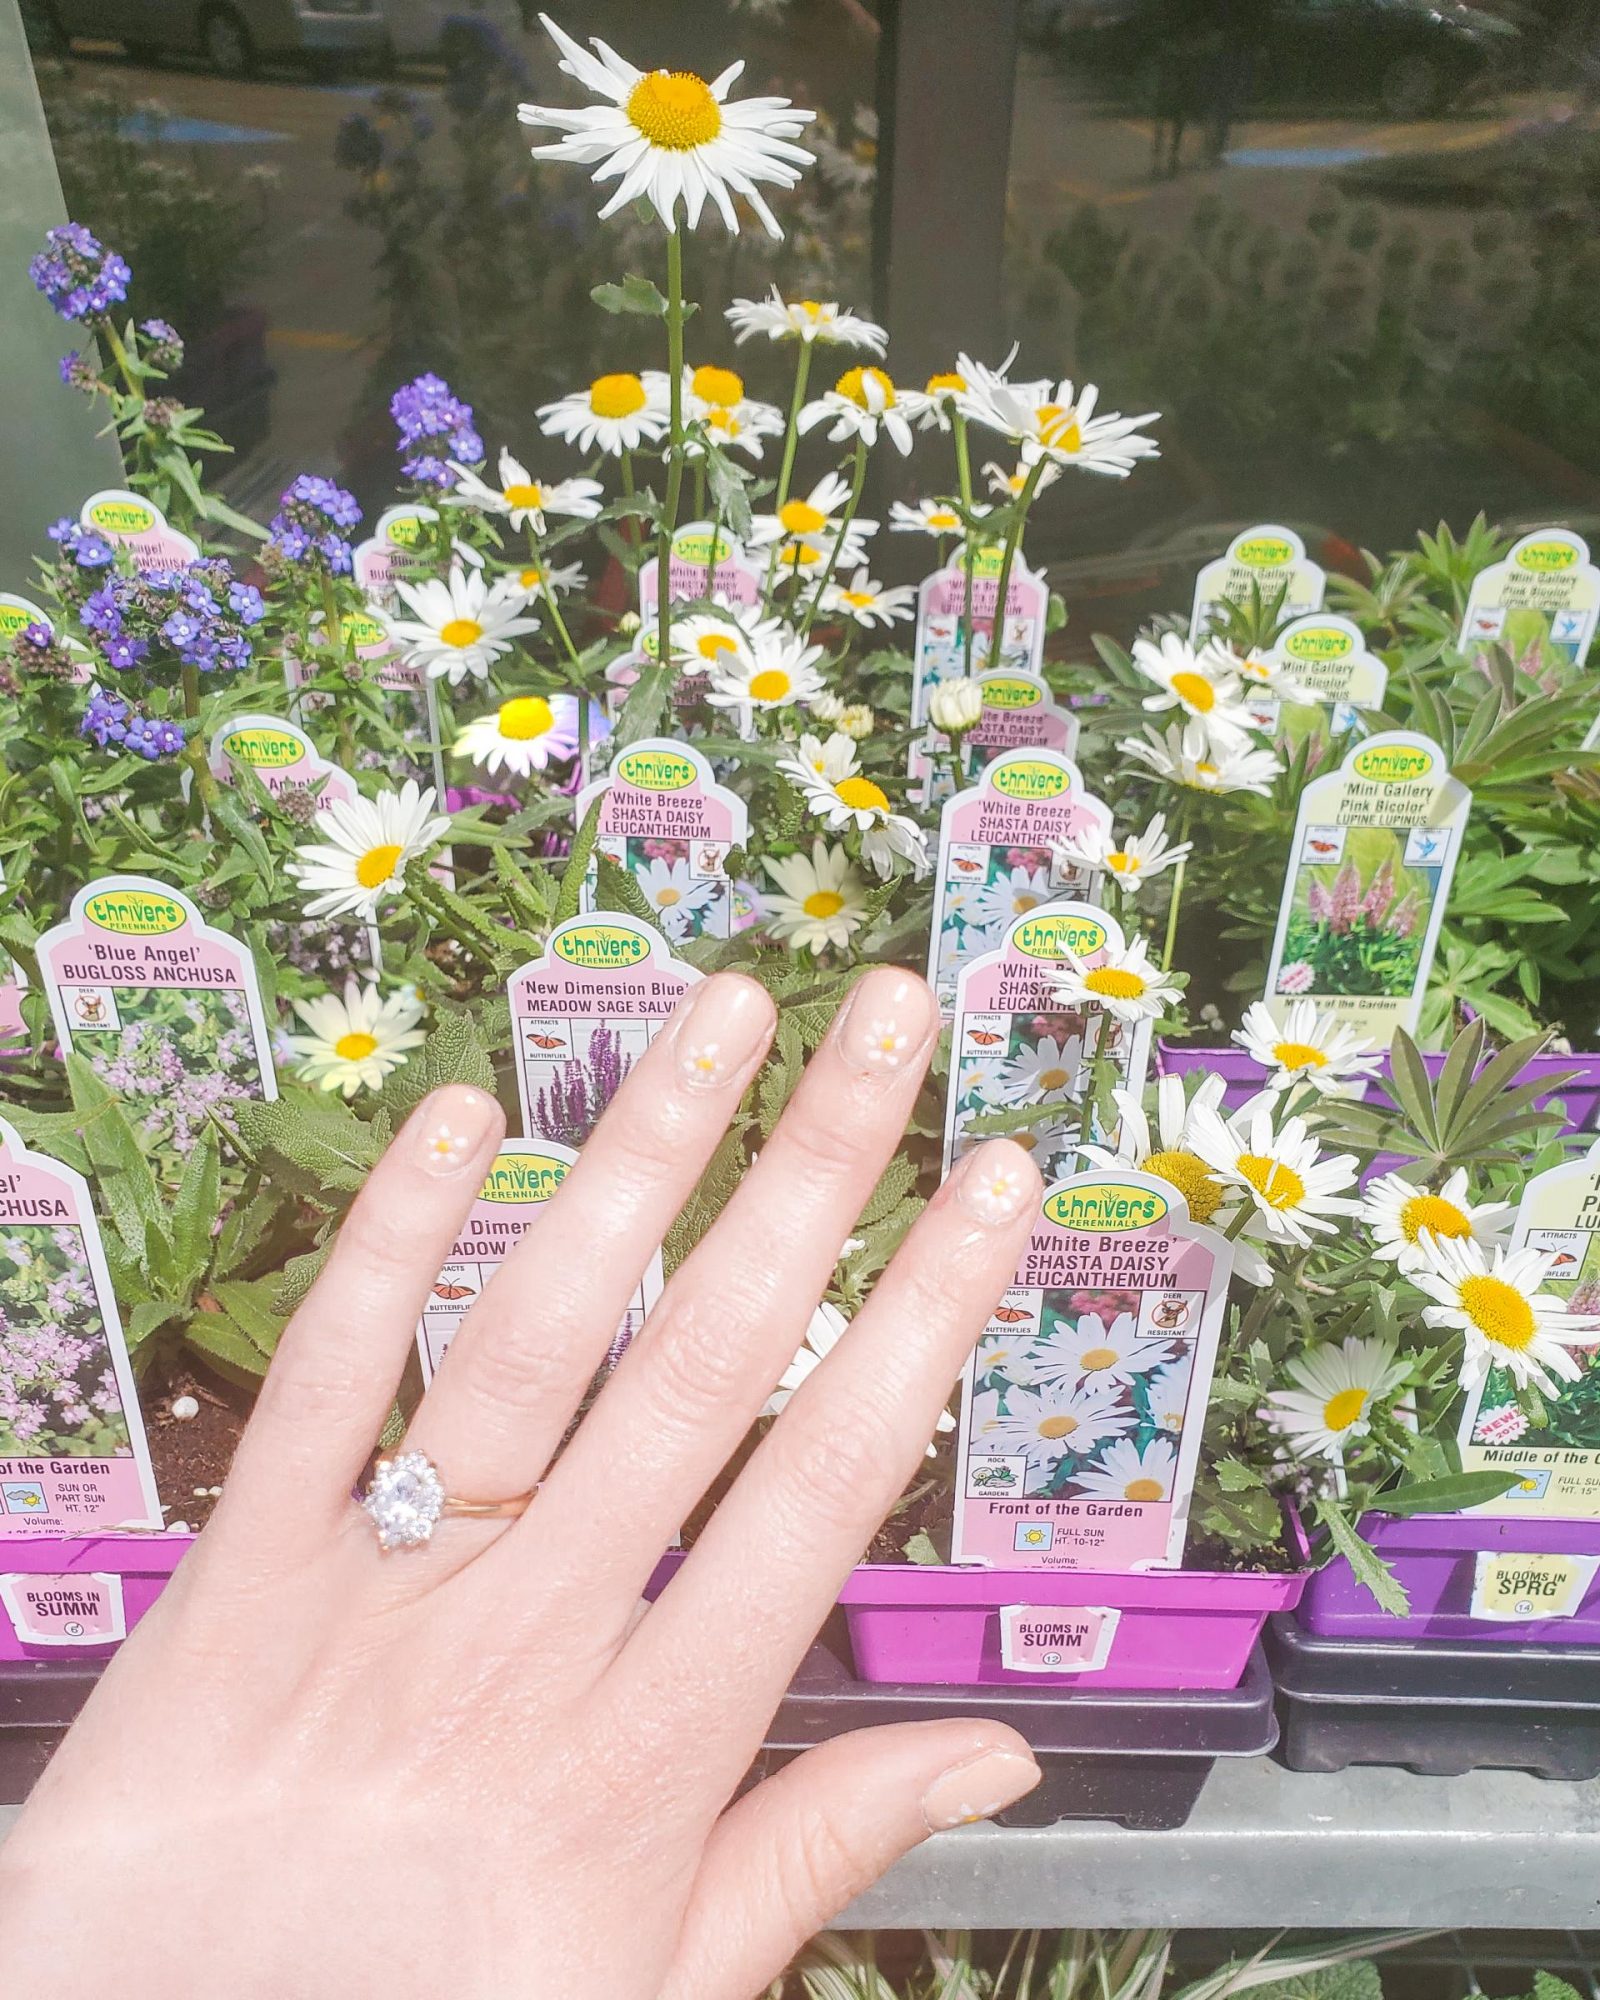 A manicured hand showing off the daisies painted on her nails in front of live daisy plants.